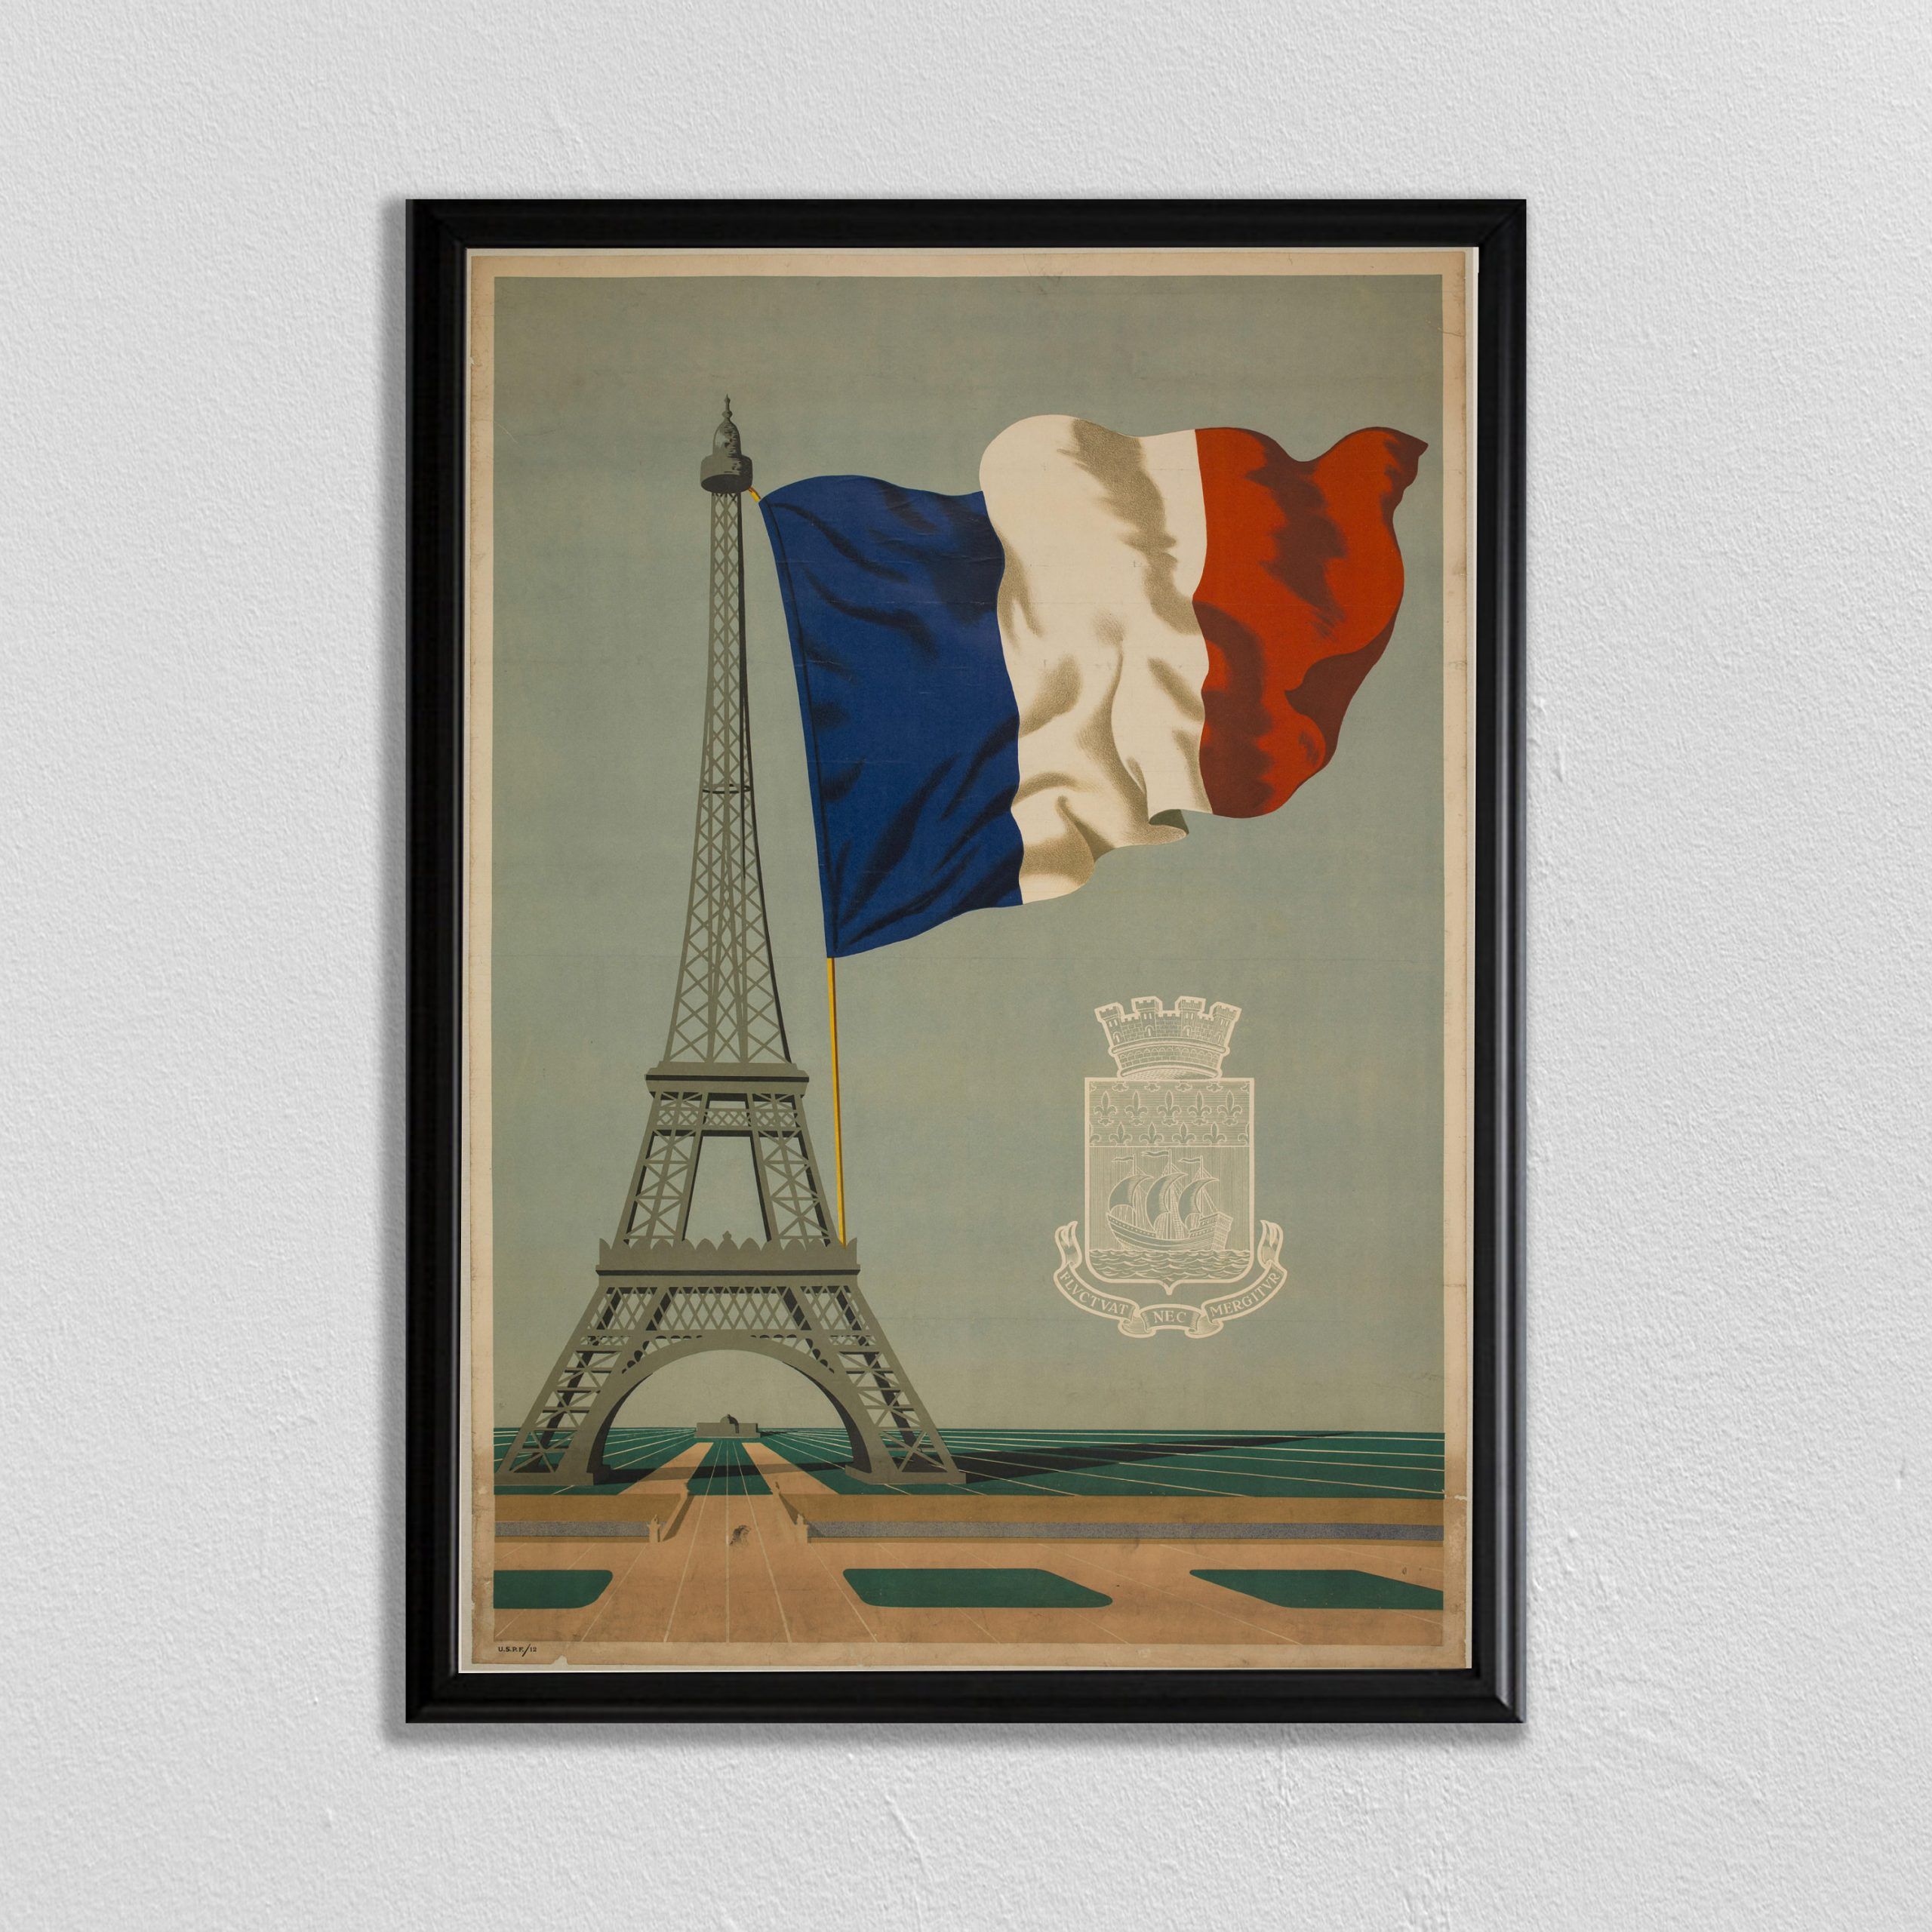 Eiffel Tower, France Art, Paris Wall Art, Eiffel Tower Art, Vintage With Best And Newest Tower Wall Art (View 17 of 20)